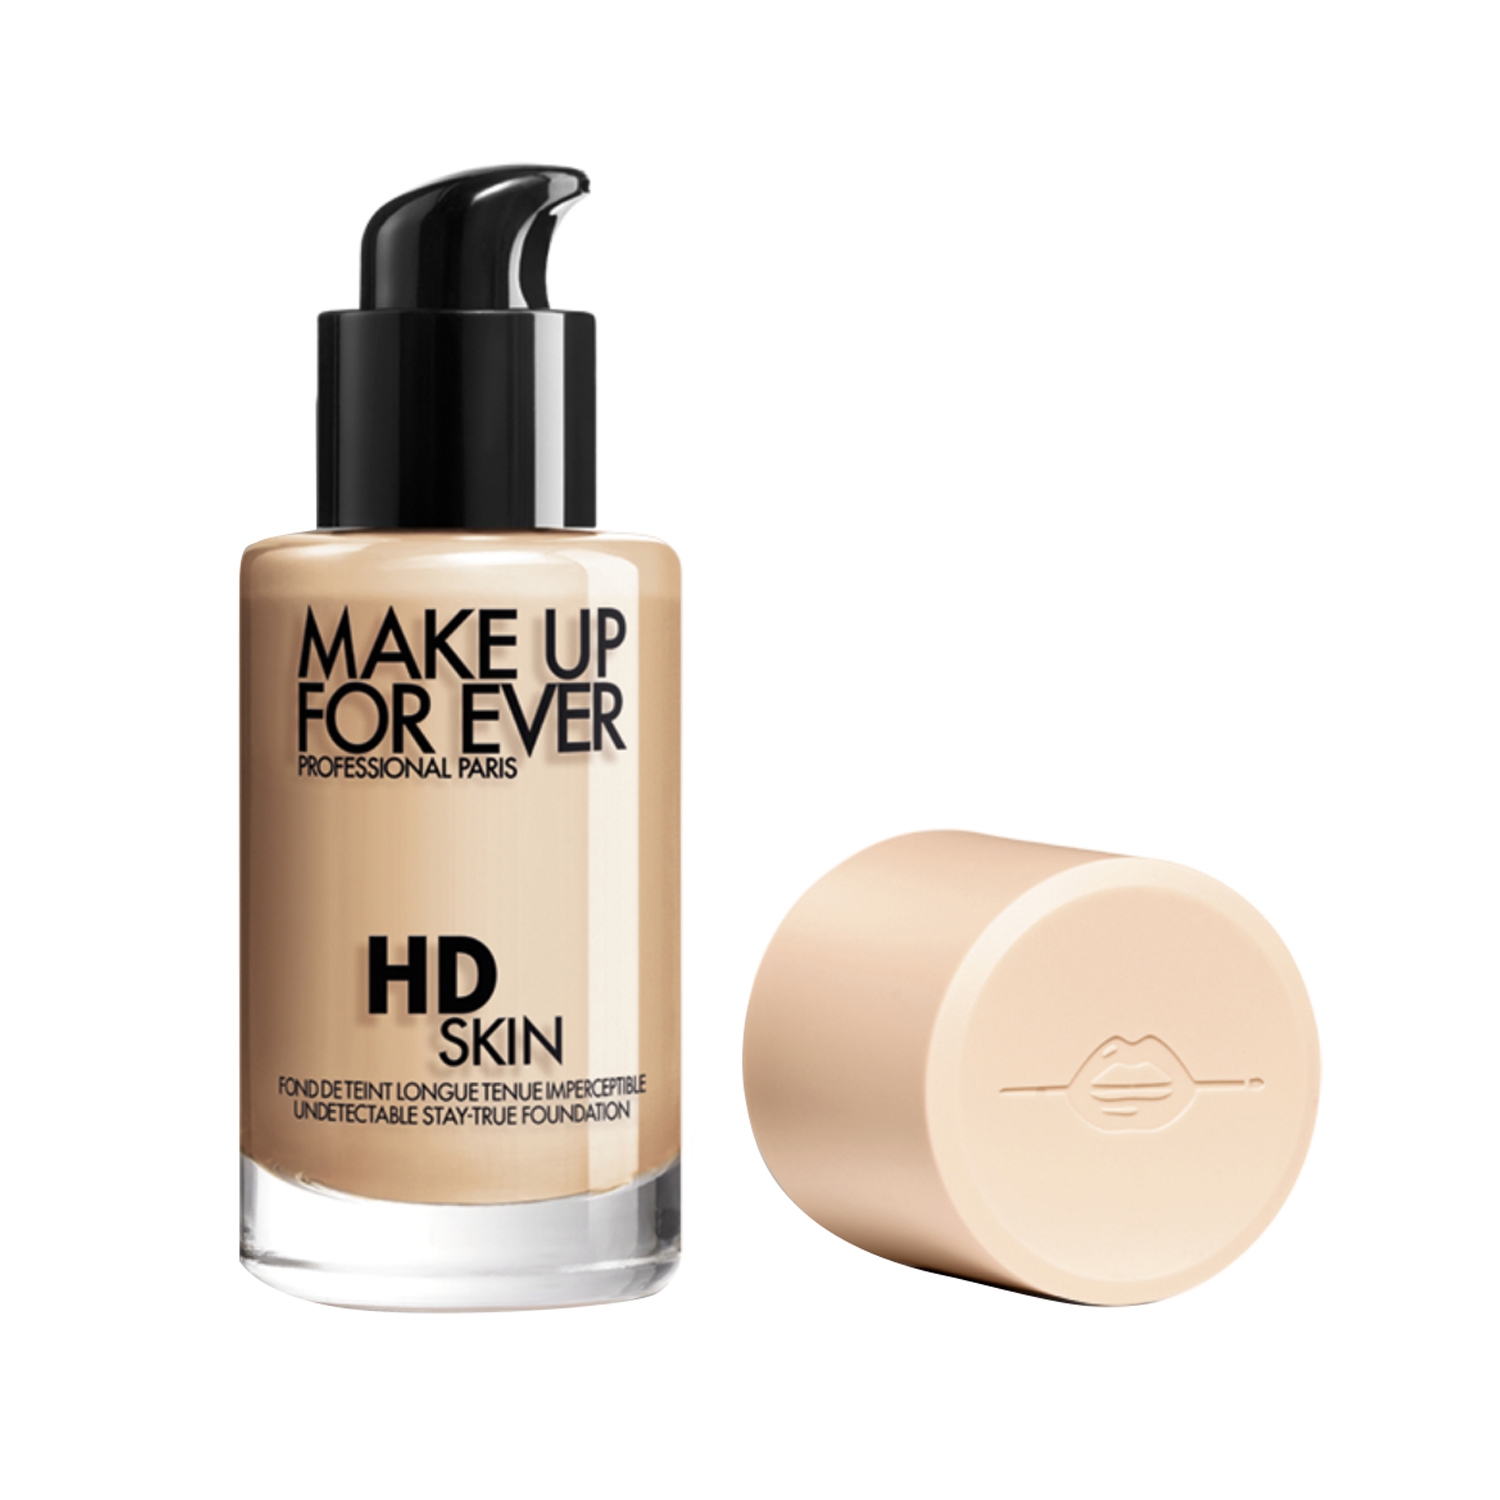 Make Up For Ever Hd Skin Foundation-1N14 (Y245) (30ml)